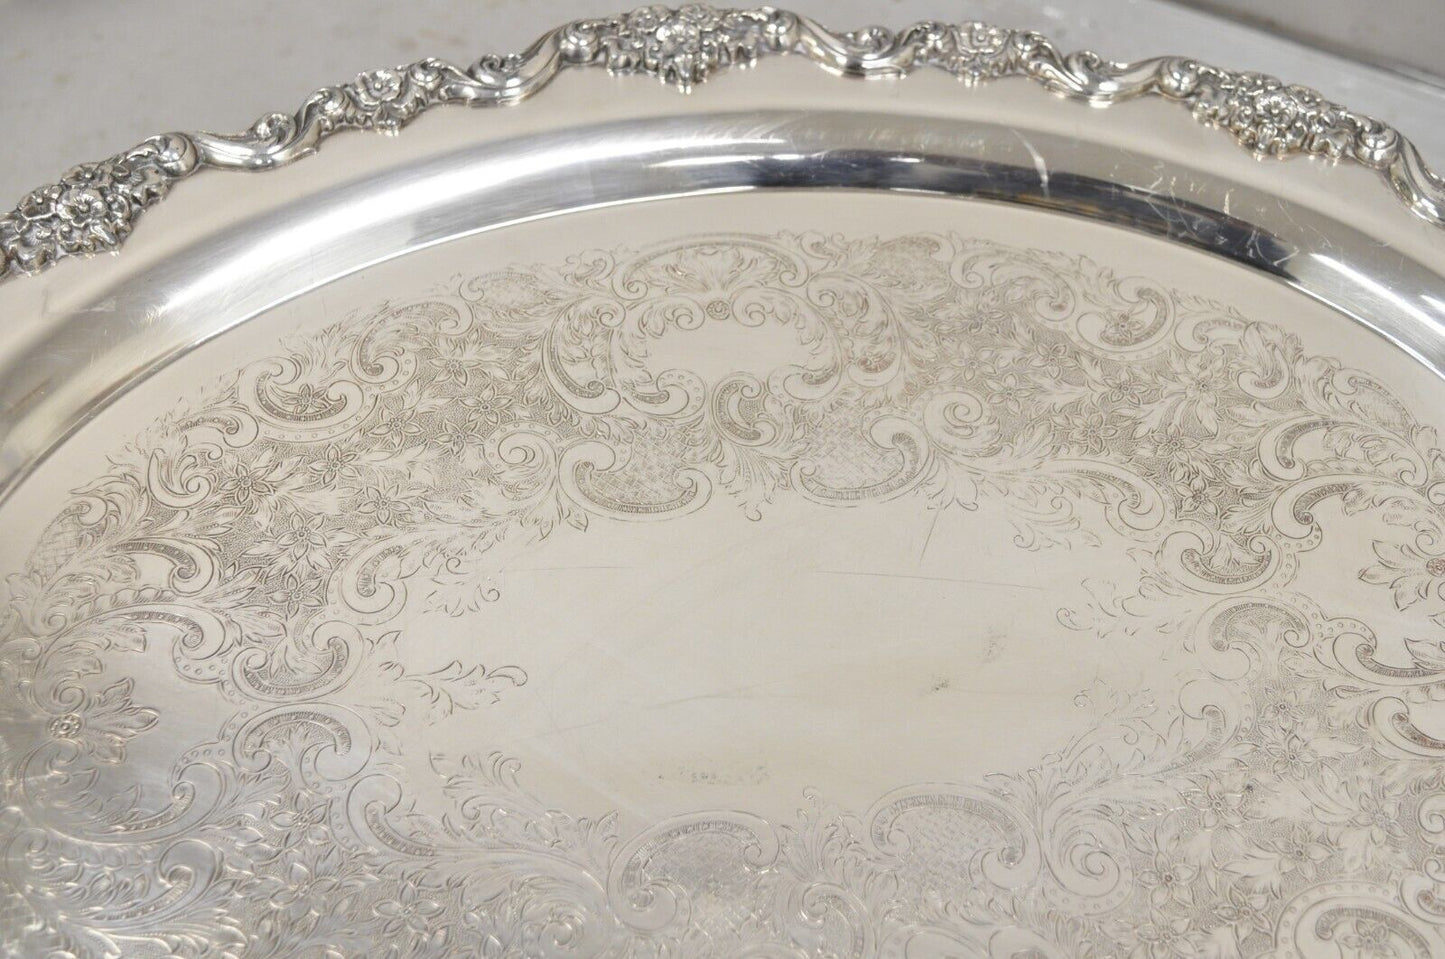 EPCA Poole Silver Co 400 Lancaster Rose Lrg Silver Plate Serving Platter Tray B